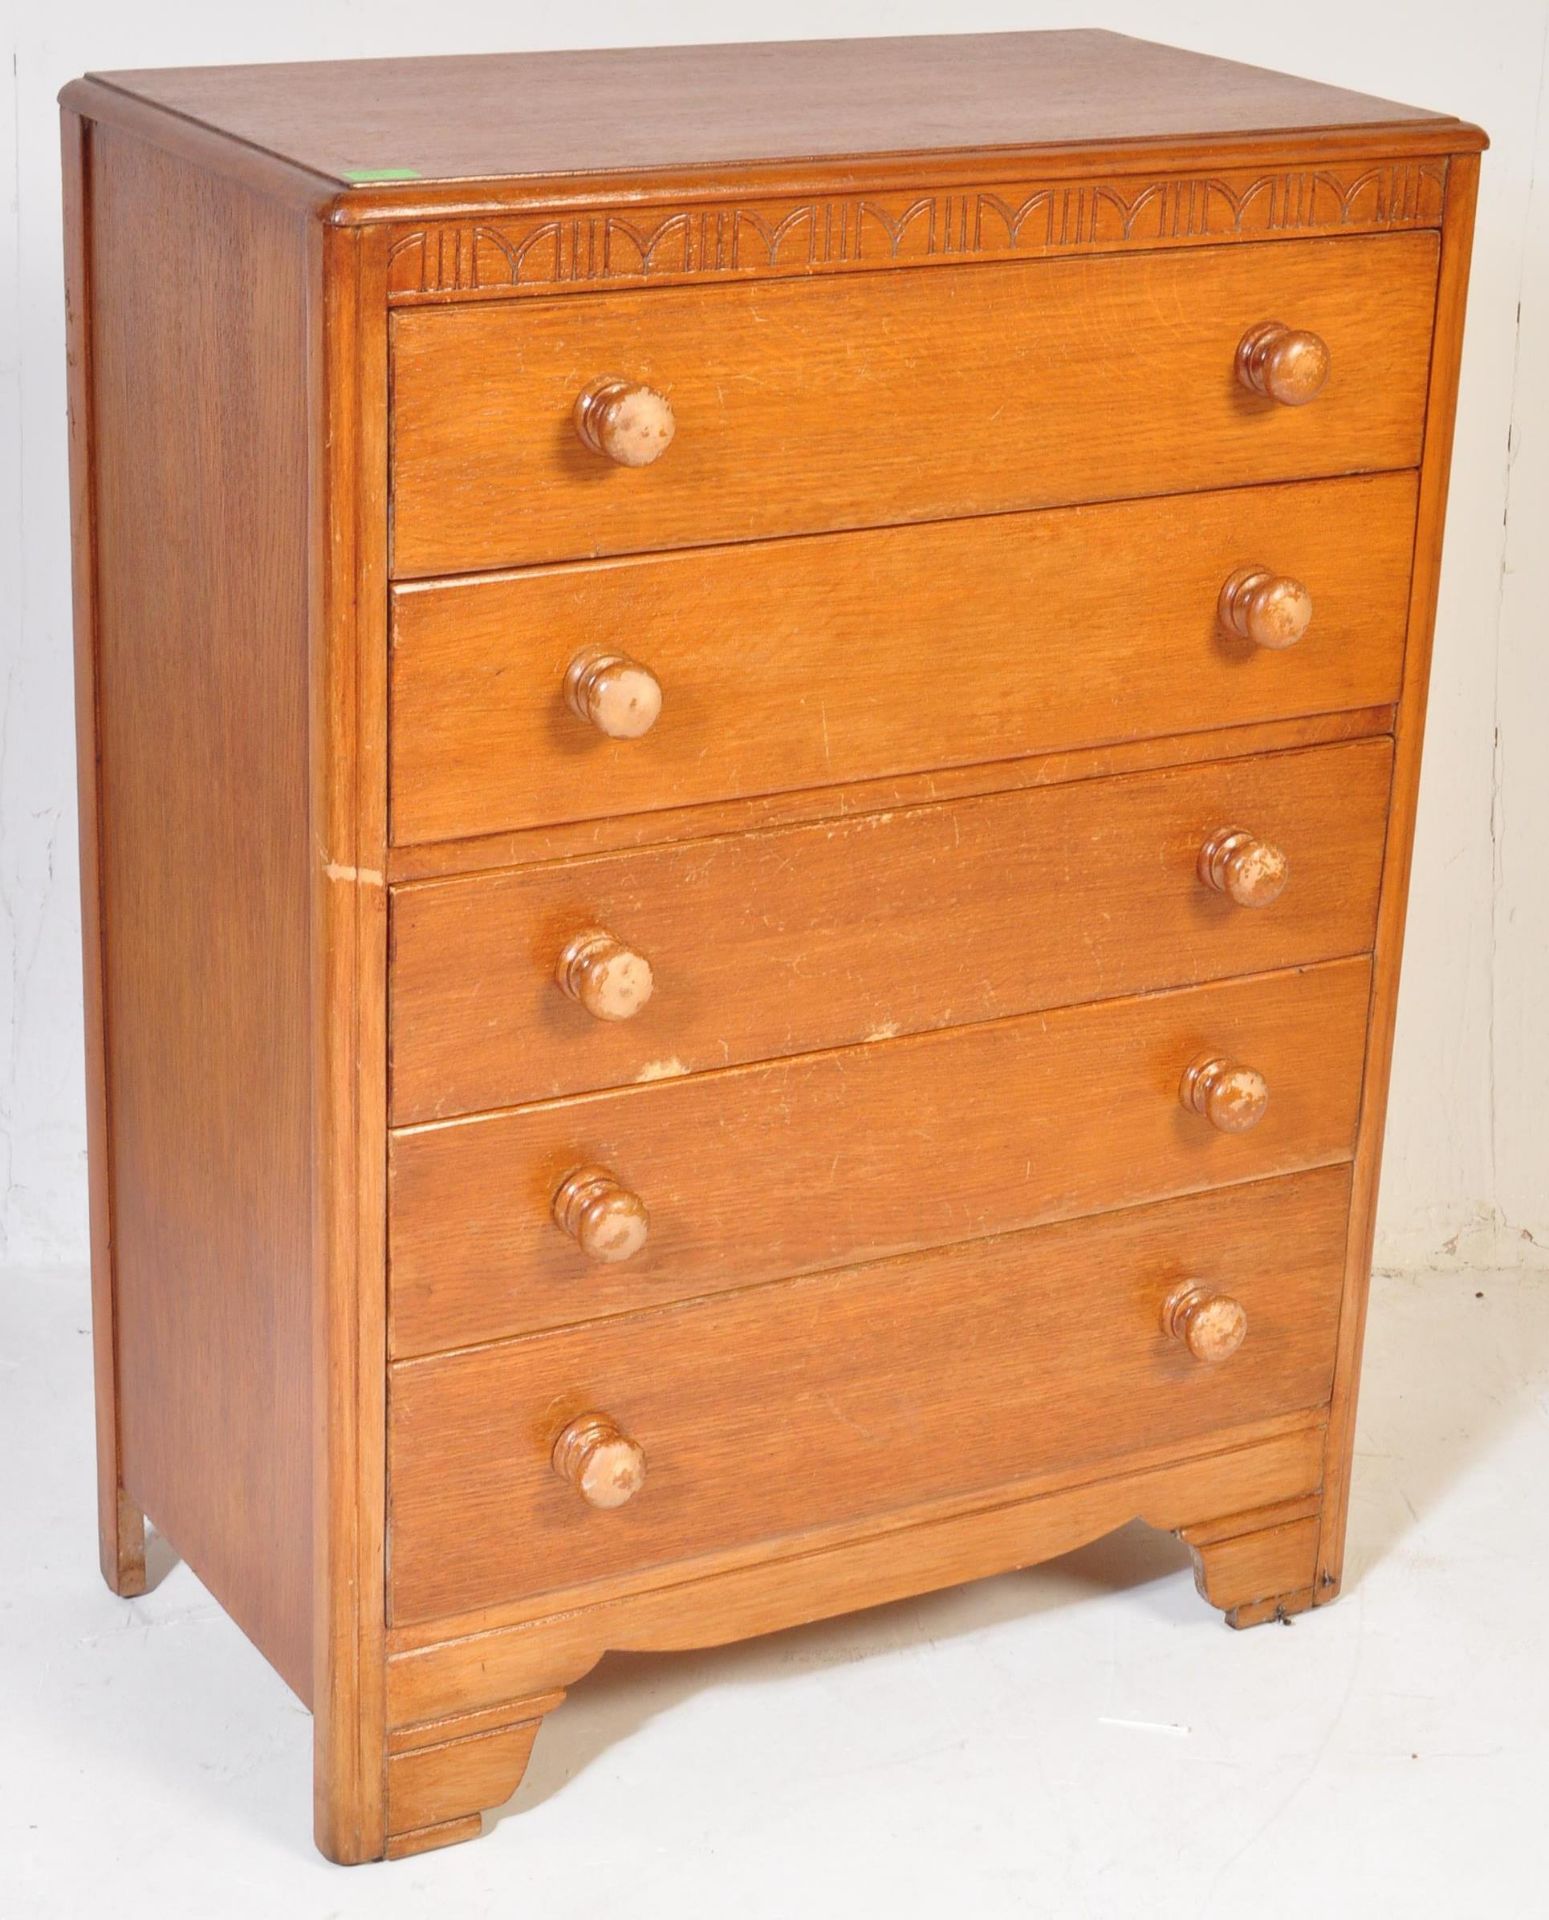 VINTAGE CIRCA 1940S LIGHT OAK CHEST OF DRAWERS - Image 2 of 5